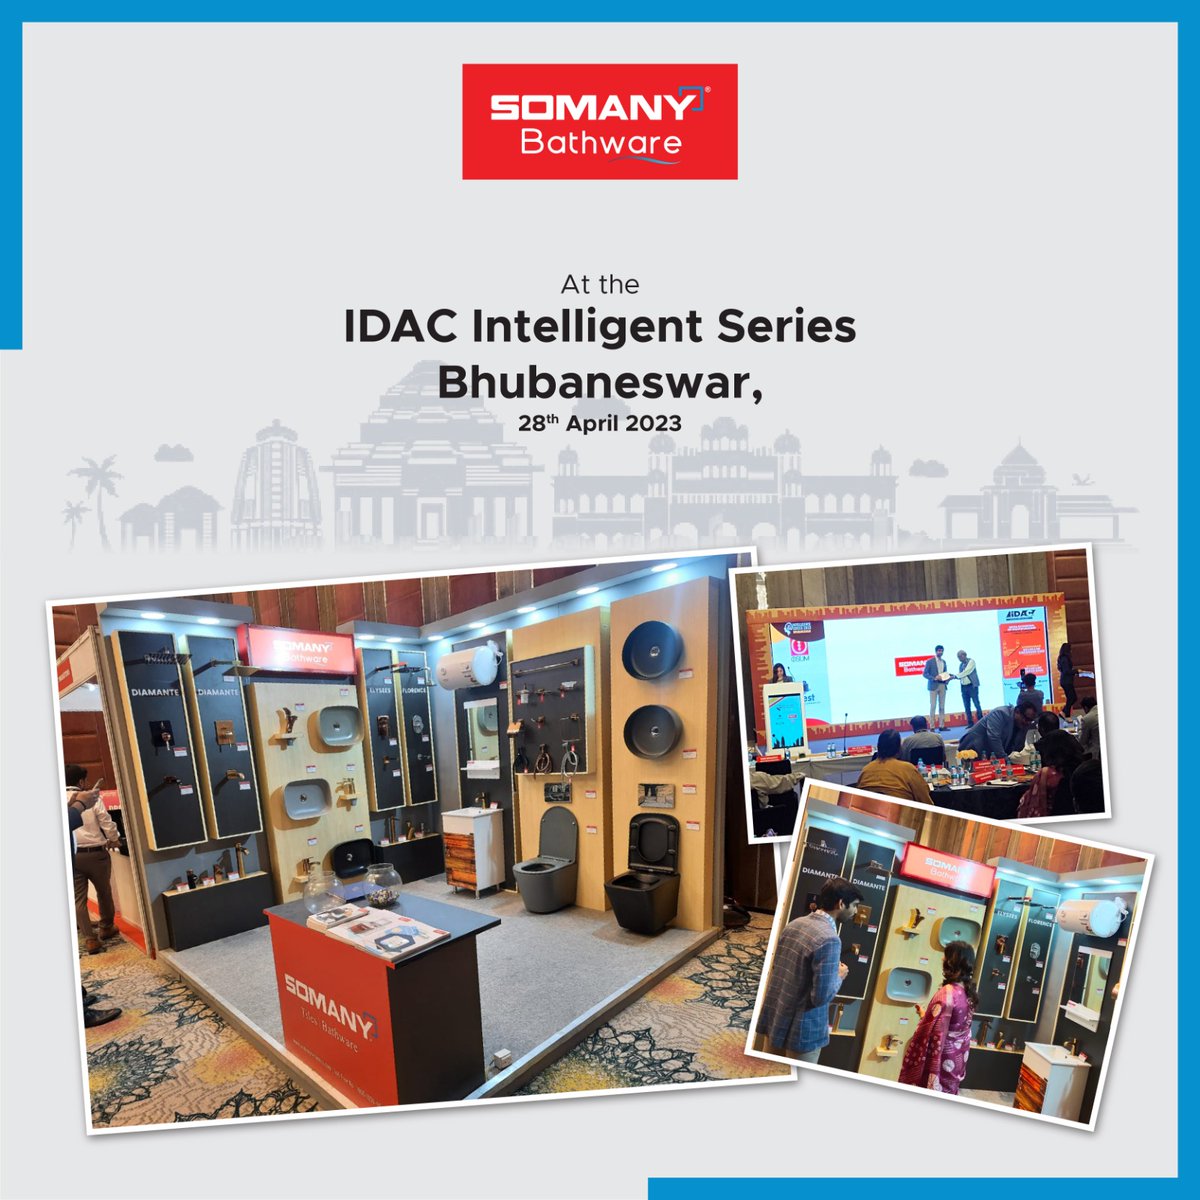 Glimpses of Somany Bathware at IDAC Intelligent Series-2023, Bhubaneswar. 

We are excited to see you in Jaipur on July 28th.

#idacexpo #exhibition #expo #constructionexpo #Bhubaneswar #SomanyBathware #LargestTileCollection